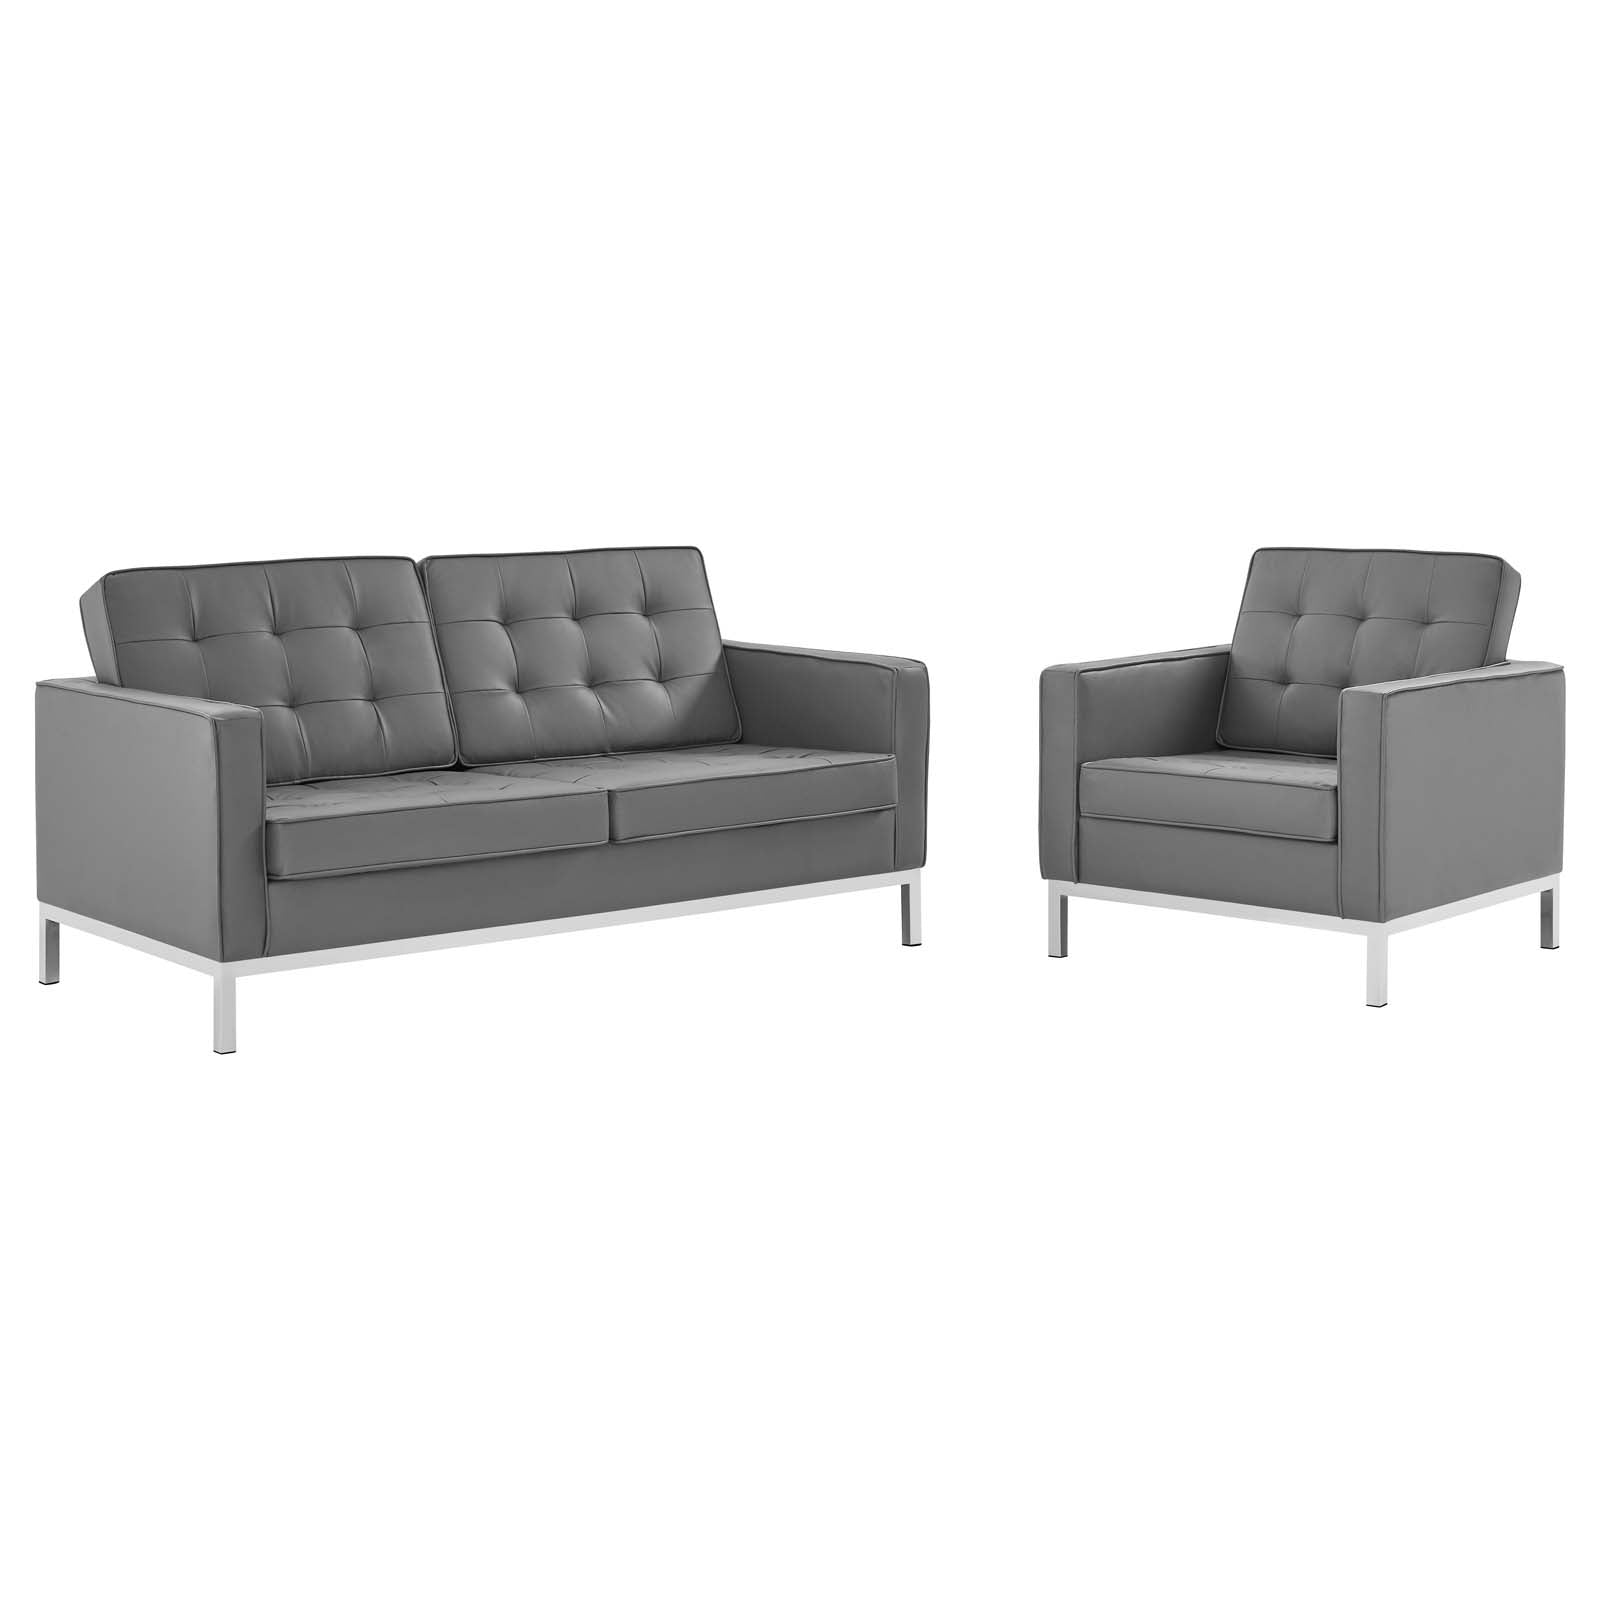 Loft Tufted Upholstered Faux Leather Loveseat and Armchair Set - East Shore Modern Home Furnishings